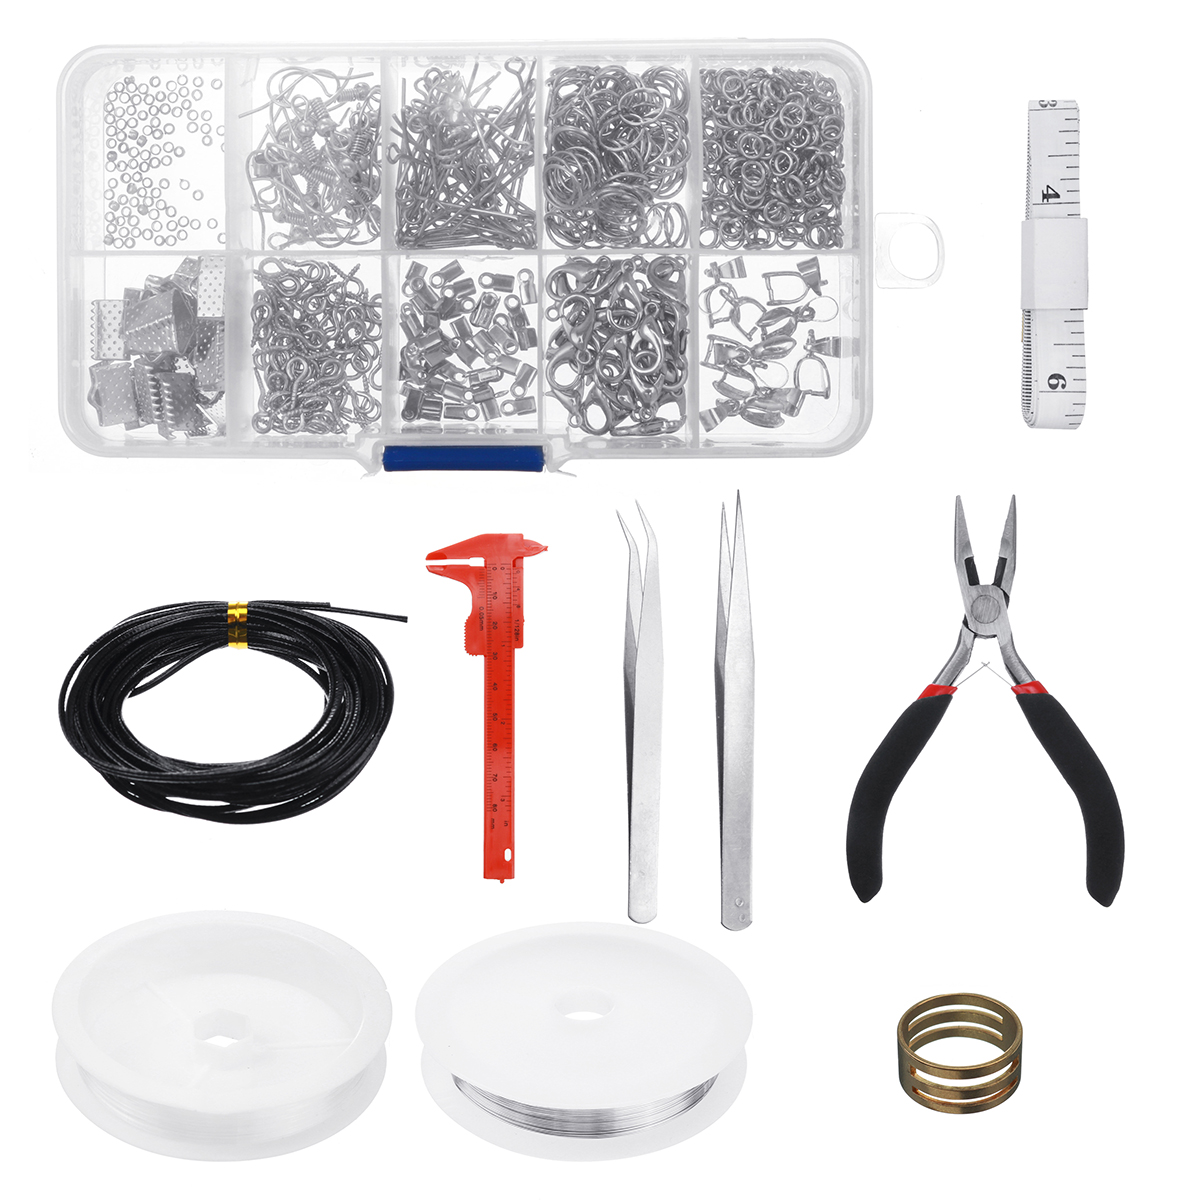 10-Grid-Accessories-Combination-Set-Open-Ring-Close-Ring-Lobster-Clasp-Ring-Feed-Ring-Hand-Tool-Plie-1816145-7